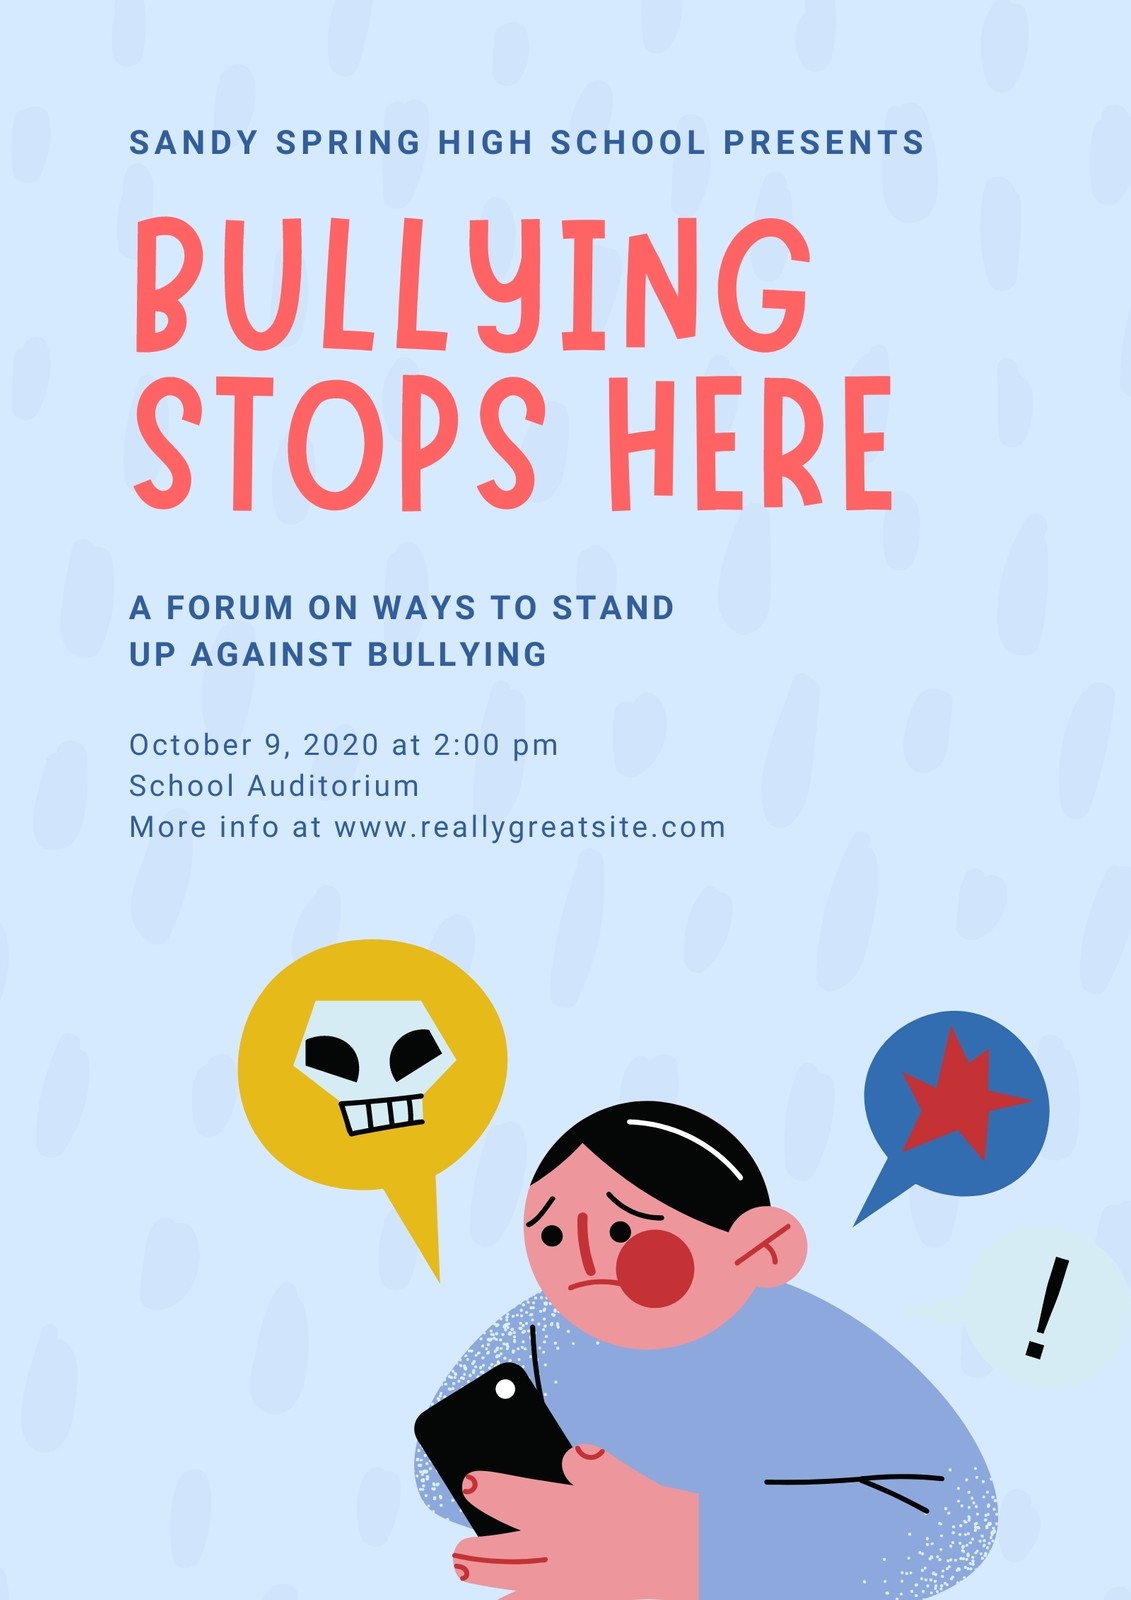 stop bullying speak up campaign